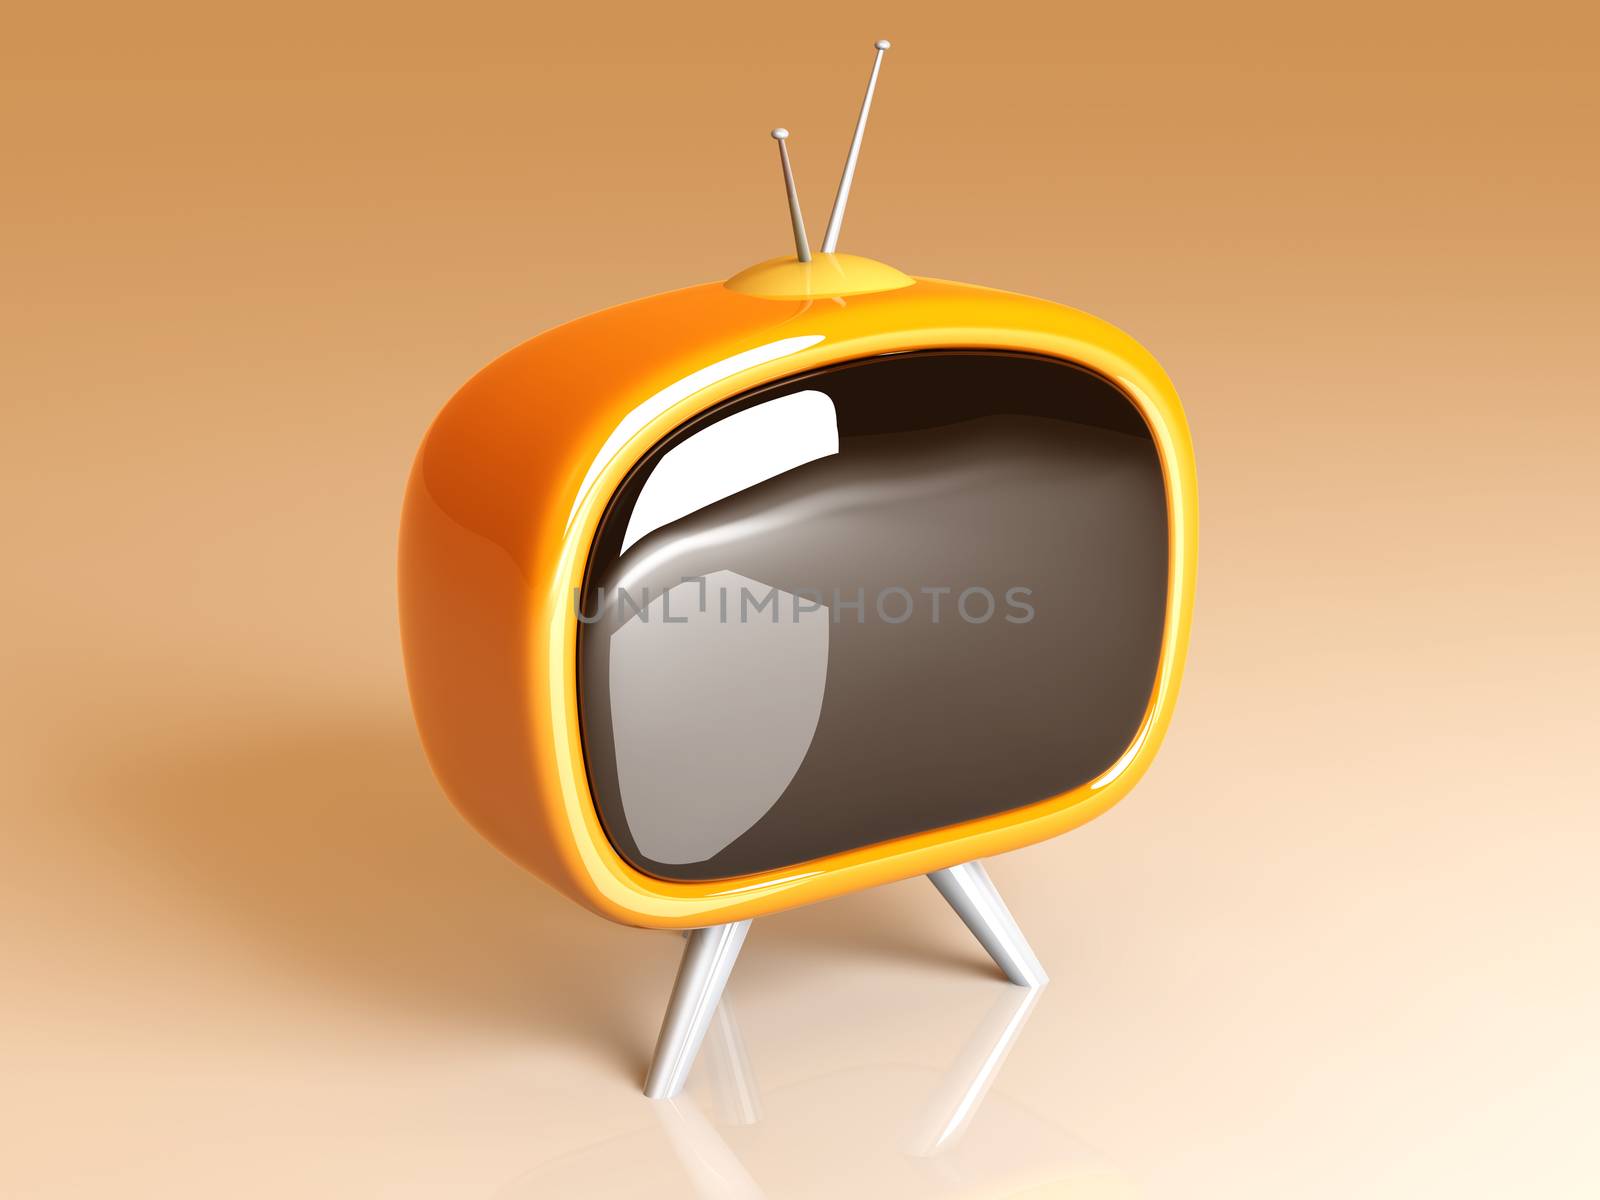 Retro Tv by Spectral